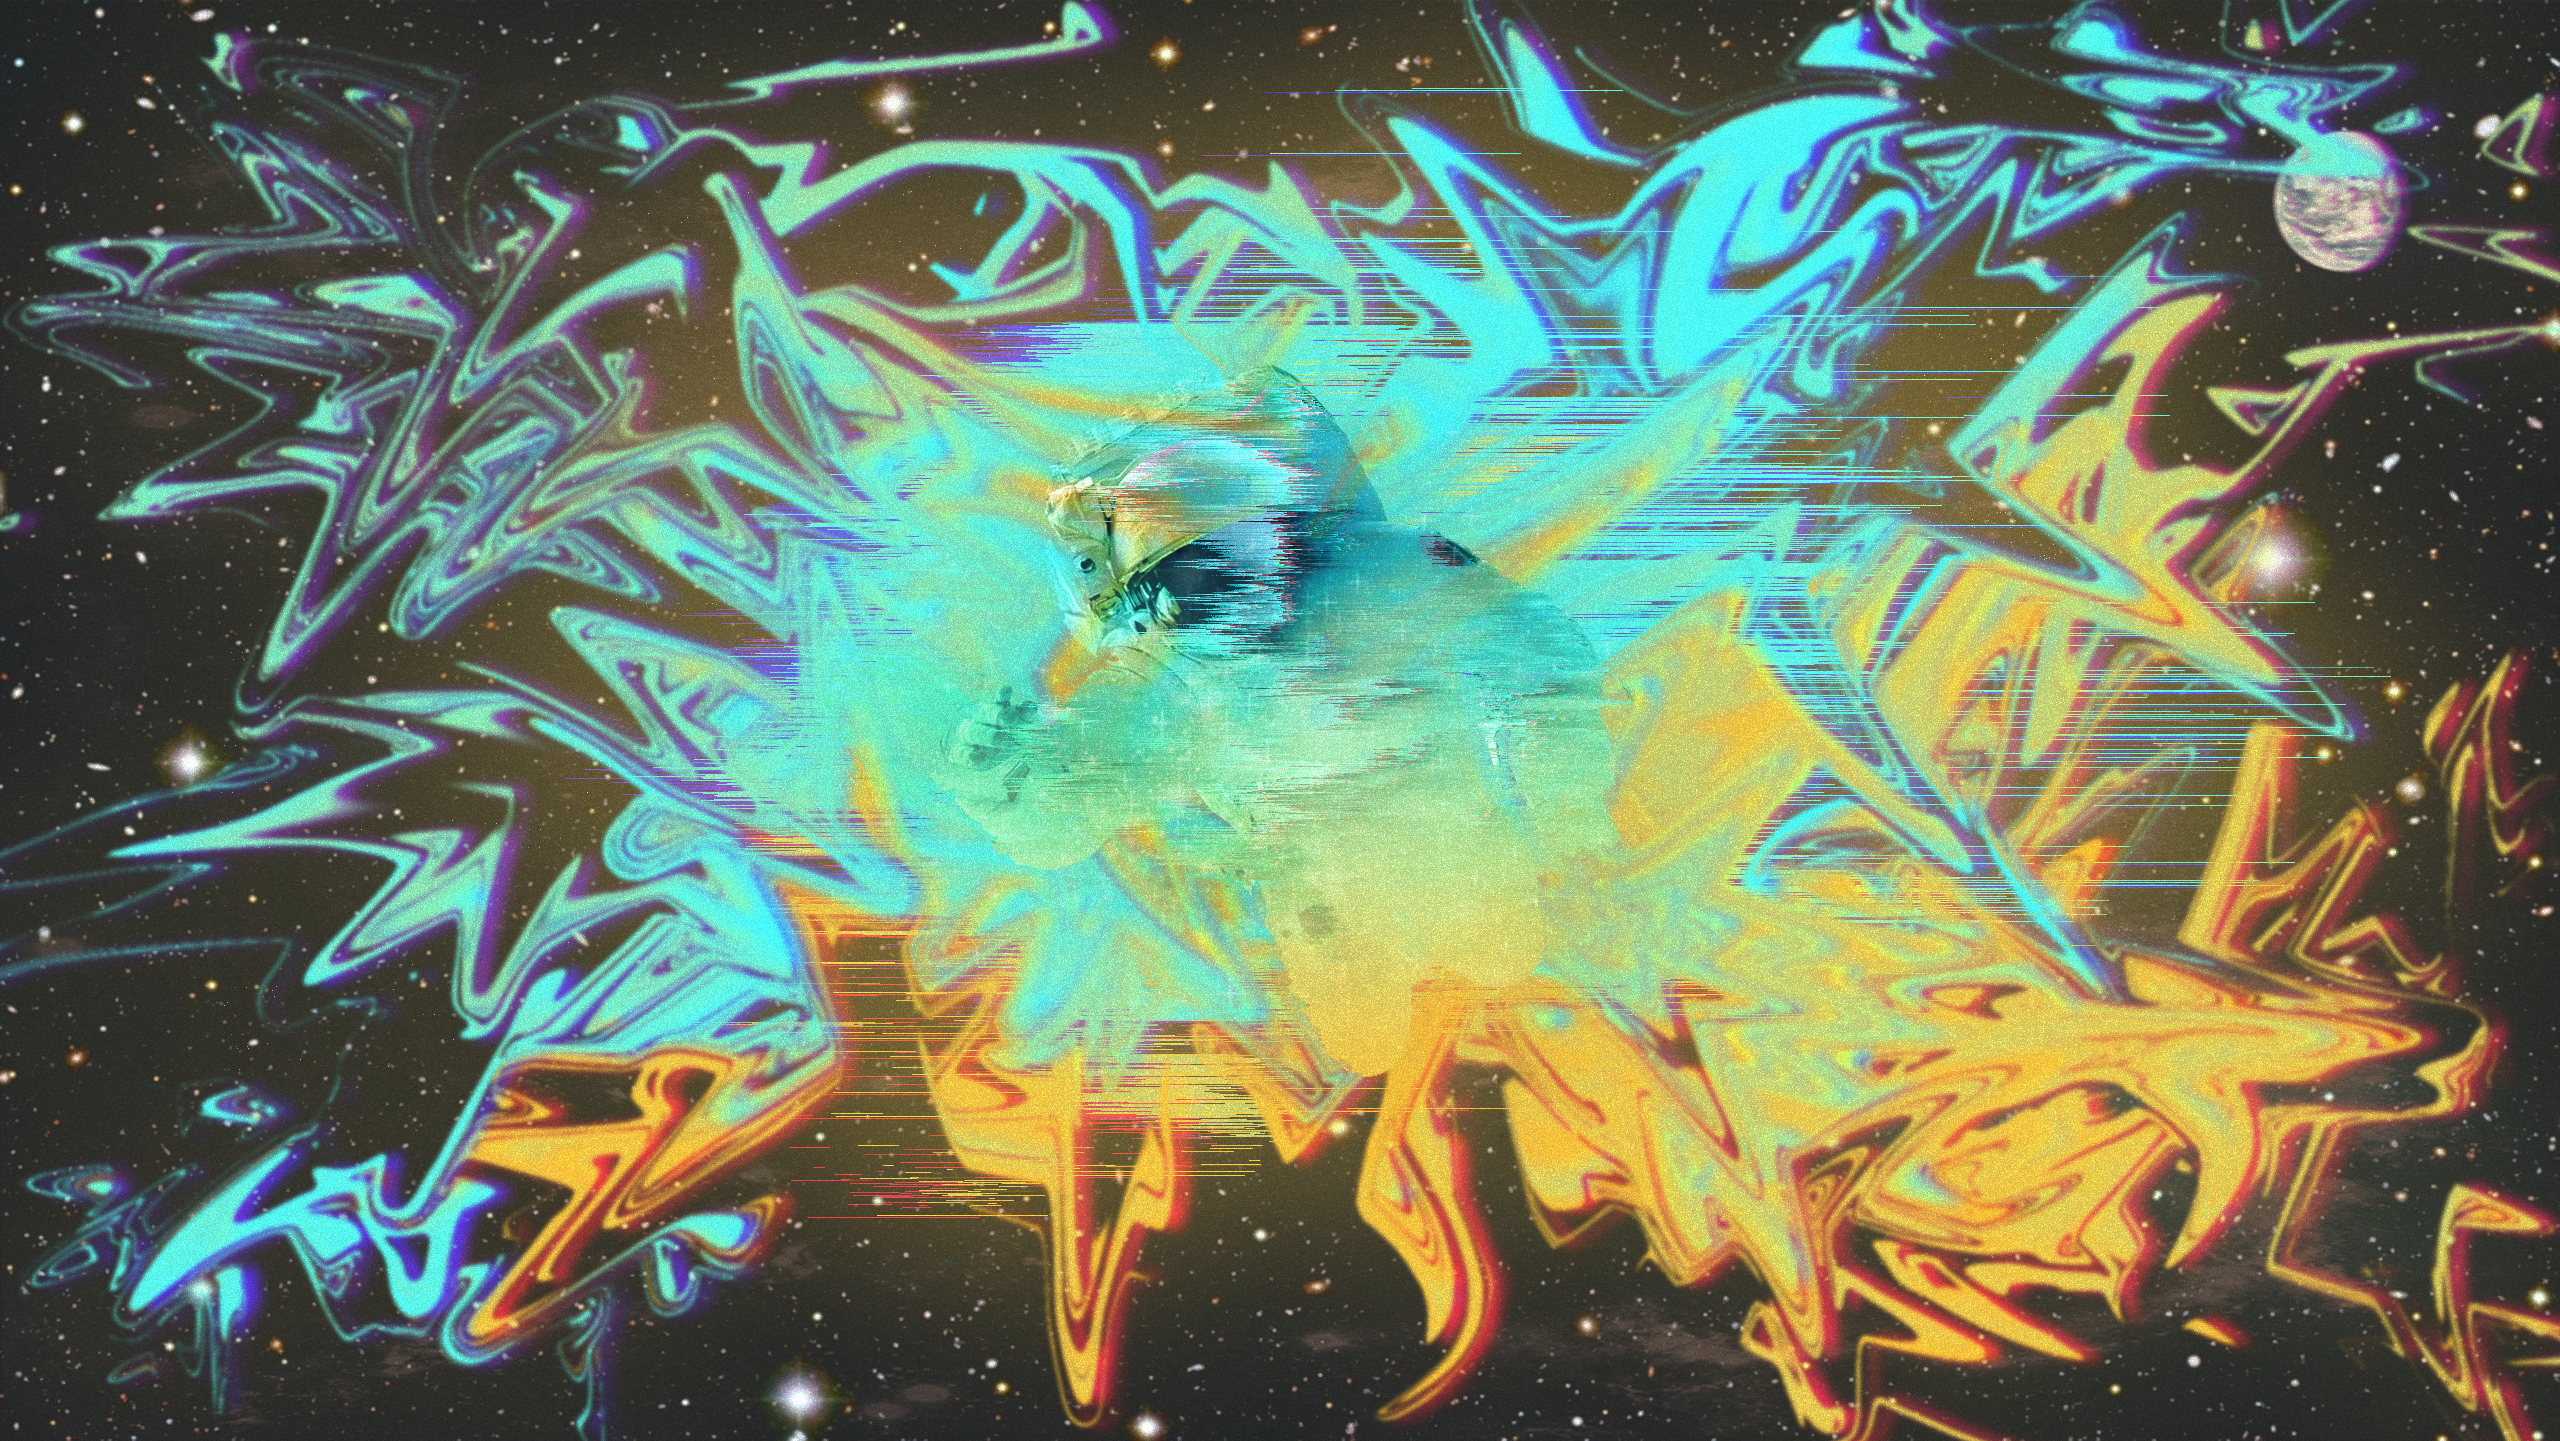 General 2560x1441 astronaut space yellow abstract blurred pixel sorting galaxy noise Earth RGB digital art space art stars surreal